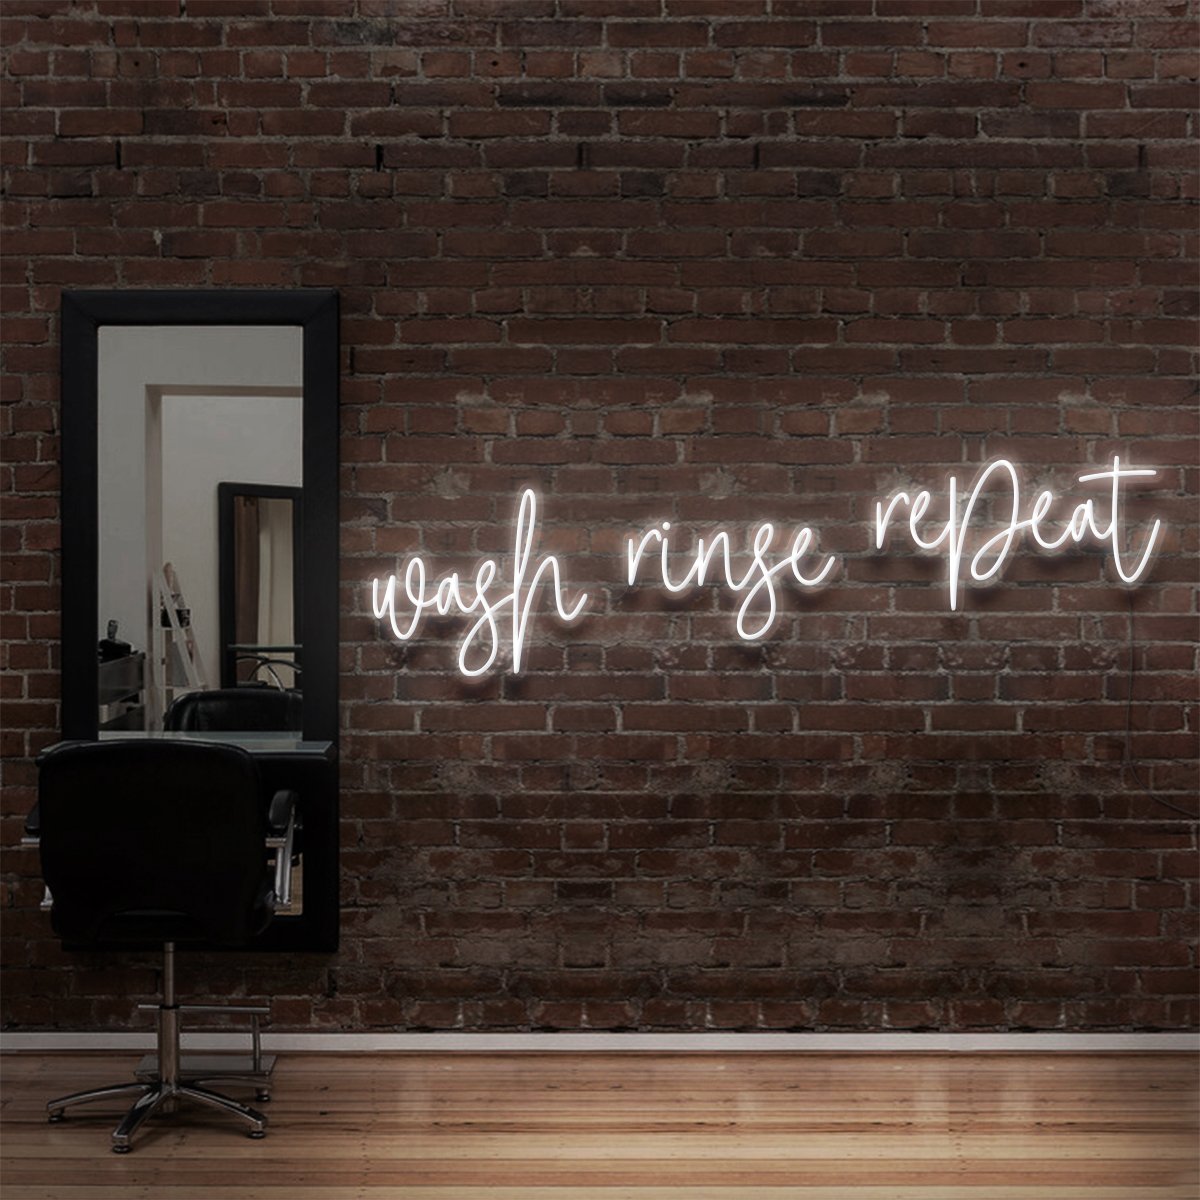 "Wash Rinse Repeat" Neon Sign for Hair Salons & Barbershops by Neon Icons